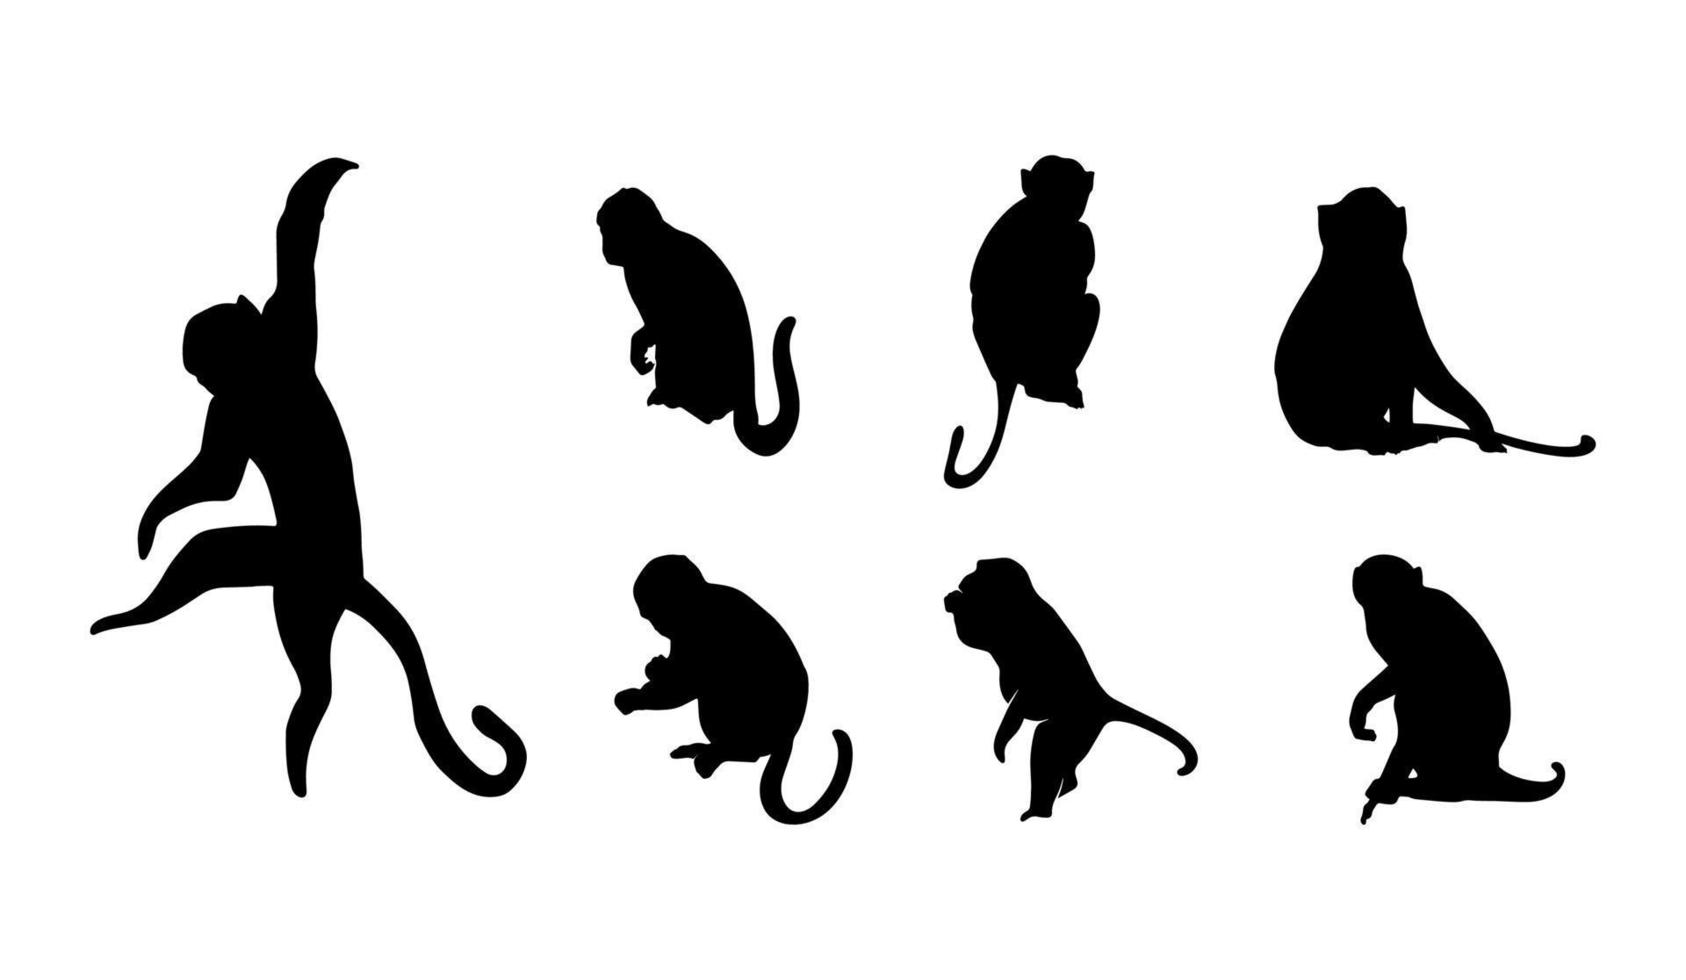 Set of Monkey Silhouette On White Background vector